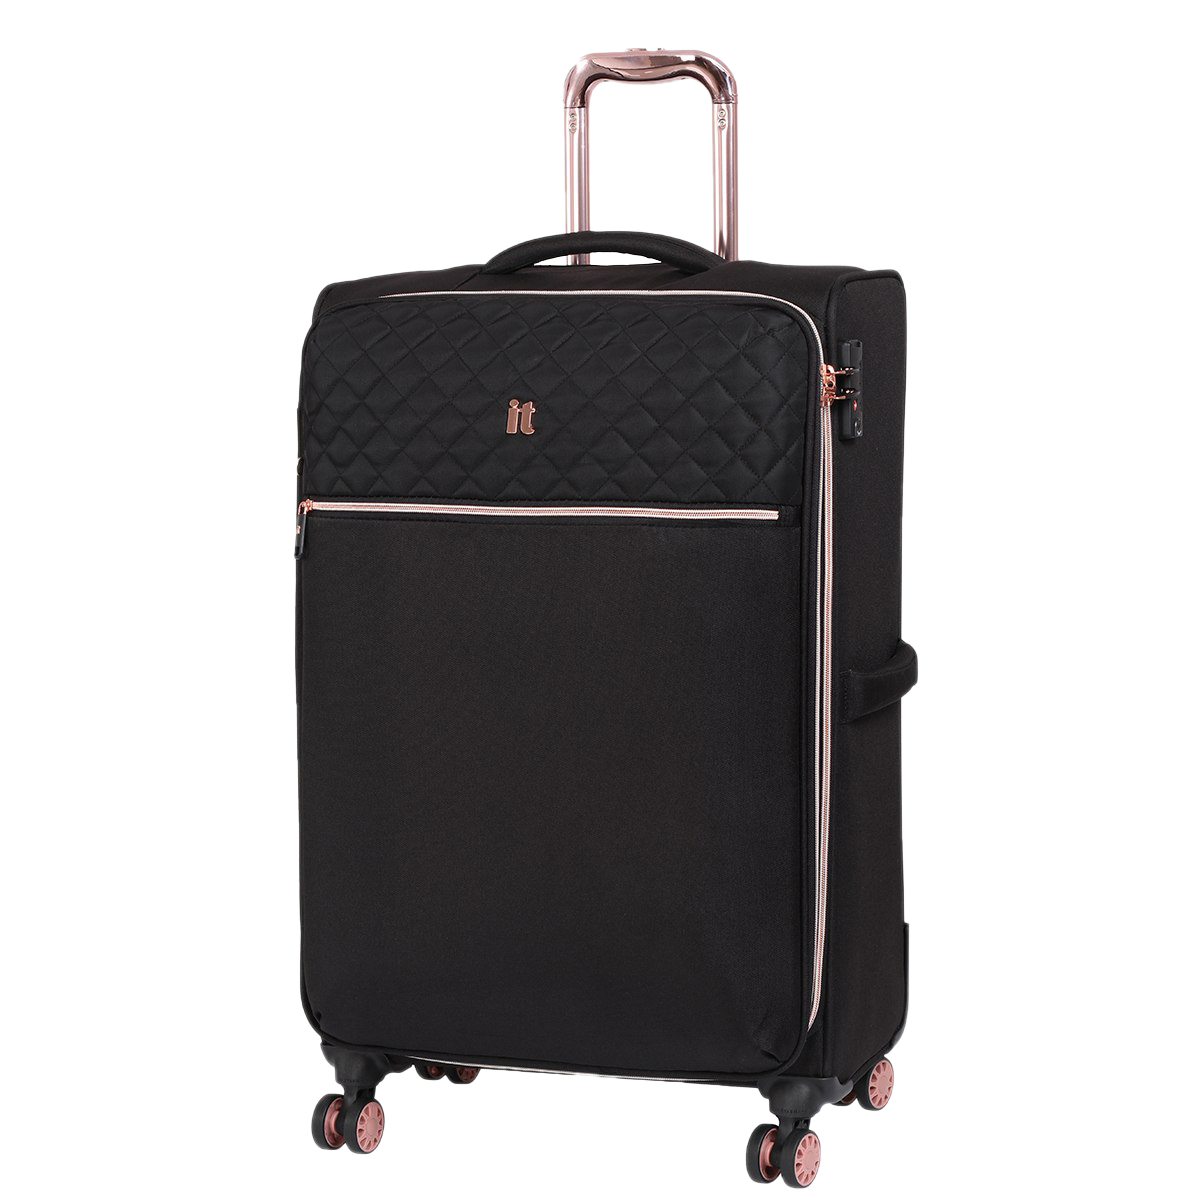 Black Suitcase PNG HD Quality